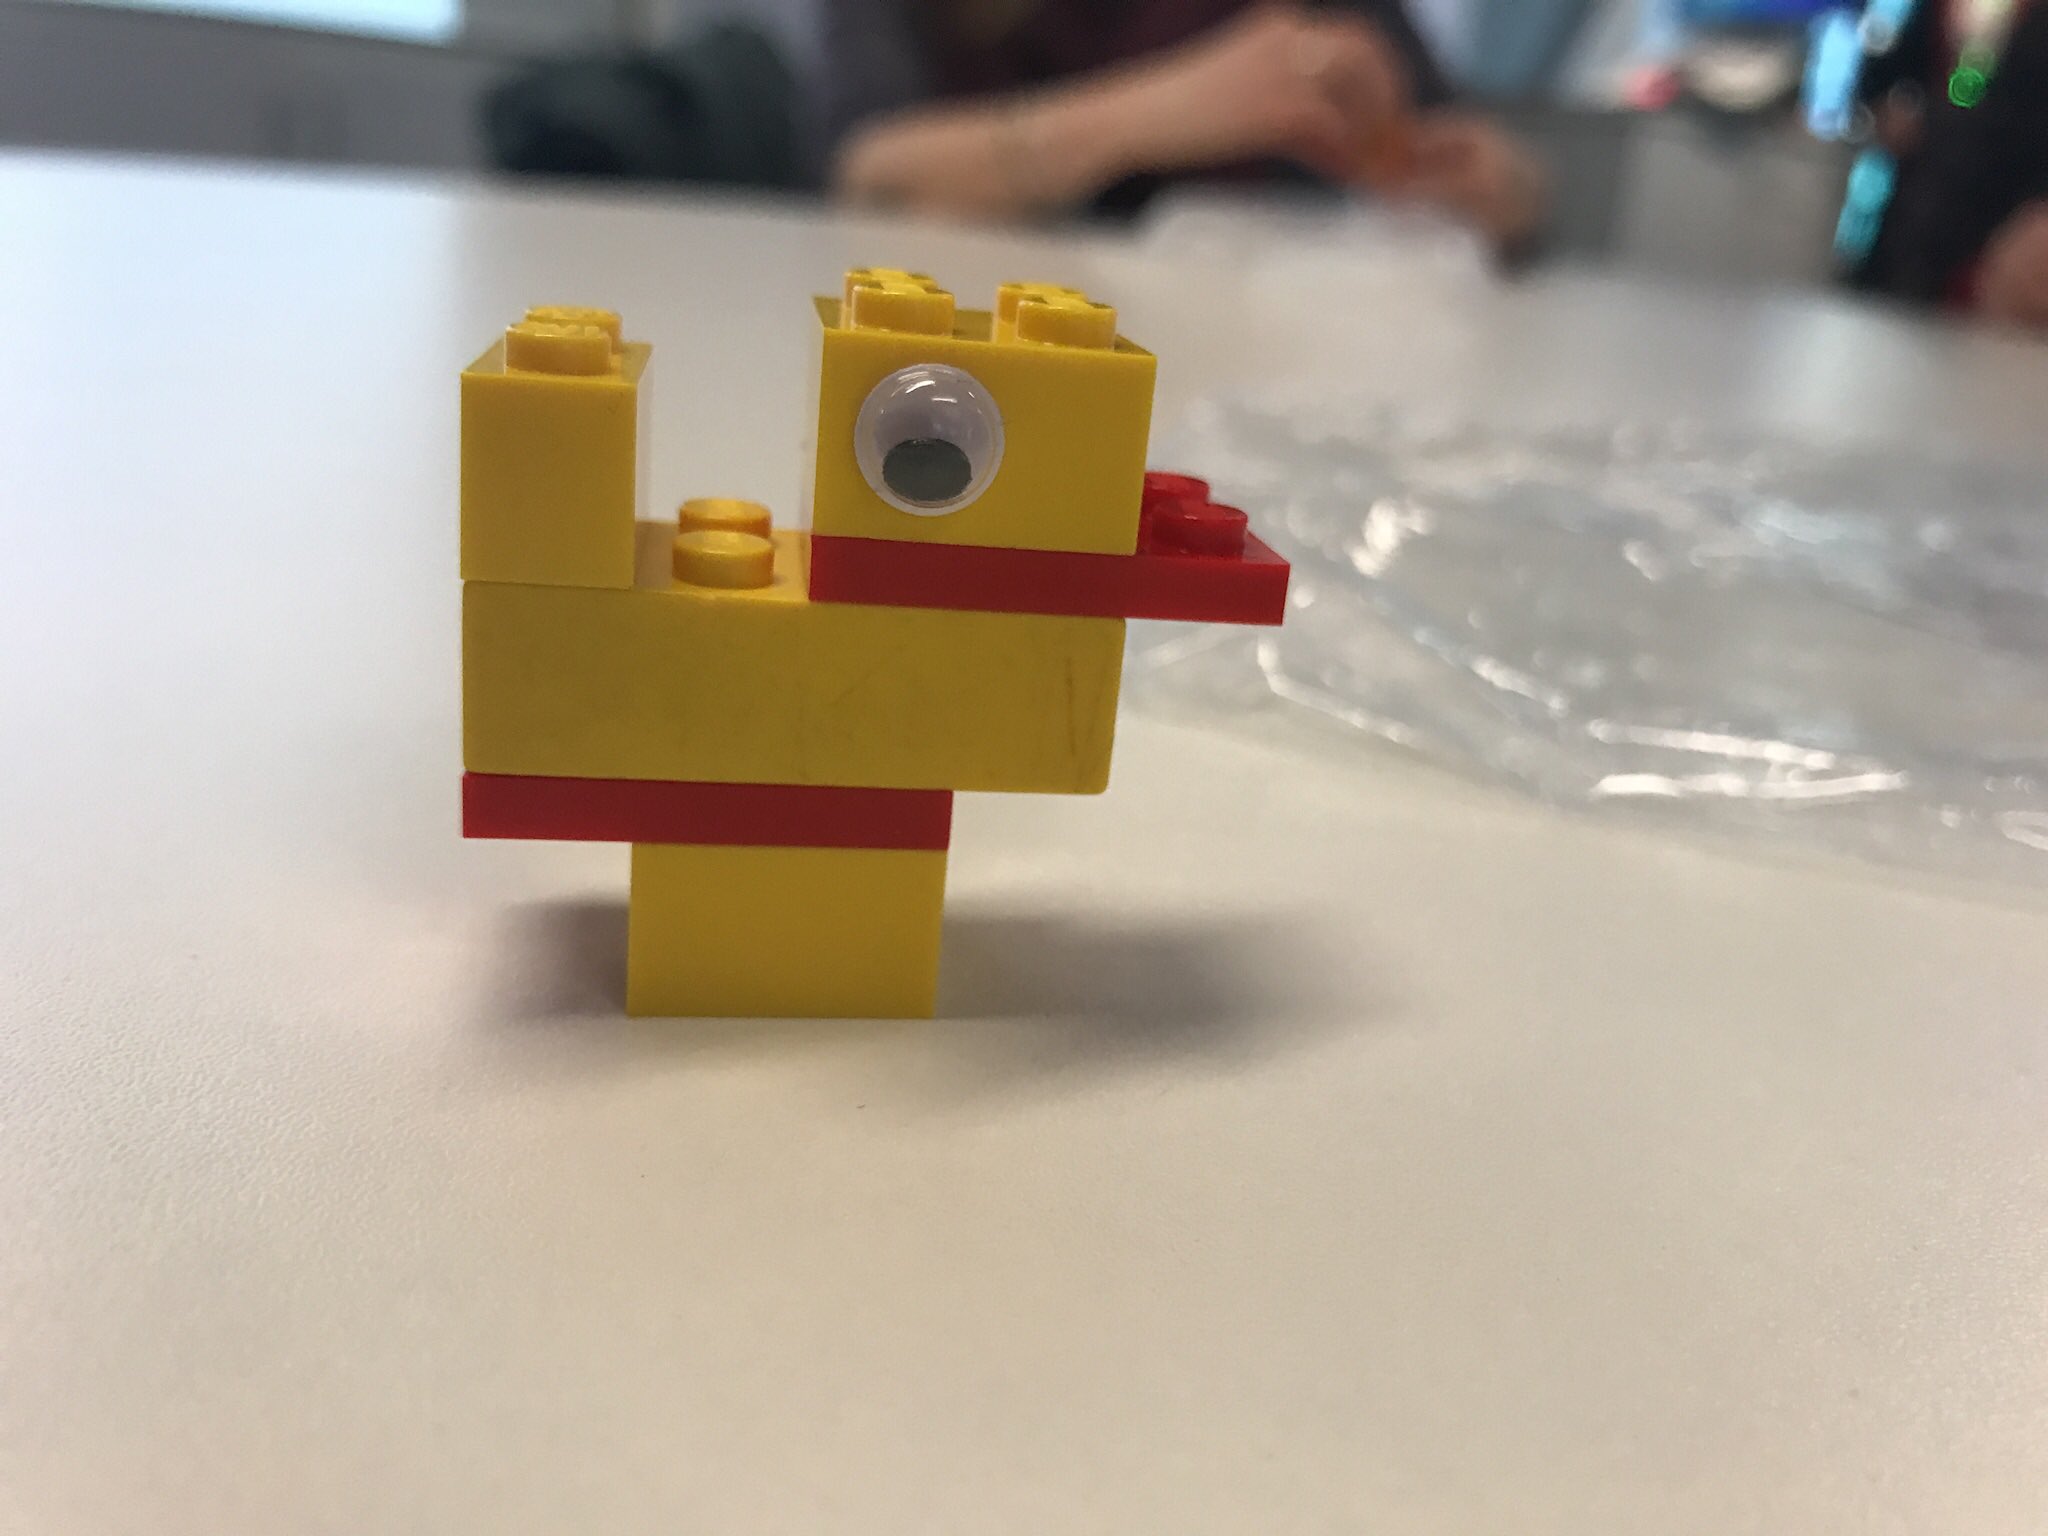 This is my @LEGO_Group duck from #SocMedHE17 ... he is now called Bob!!! https://t.co/lv1YzTPW3v